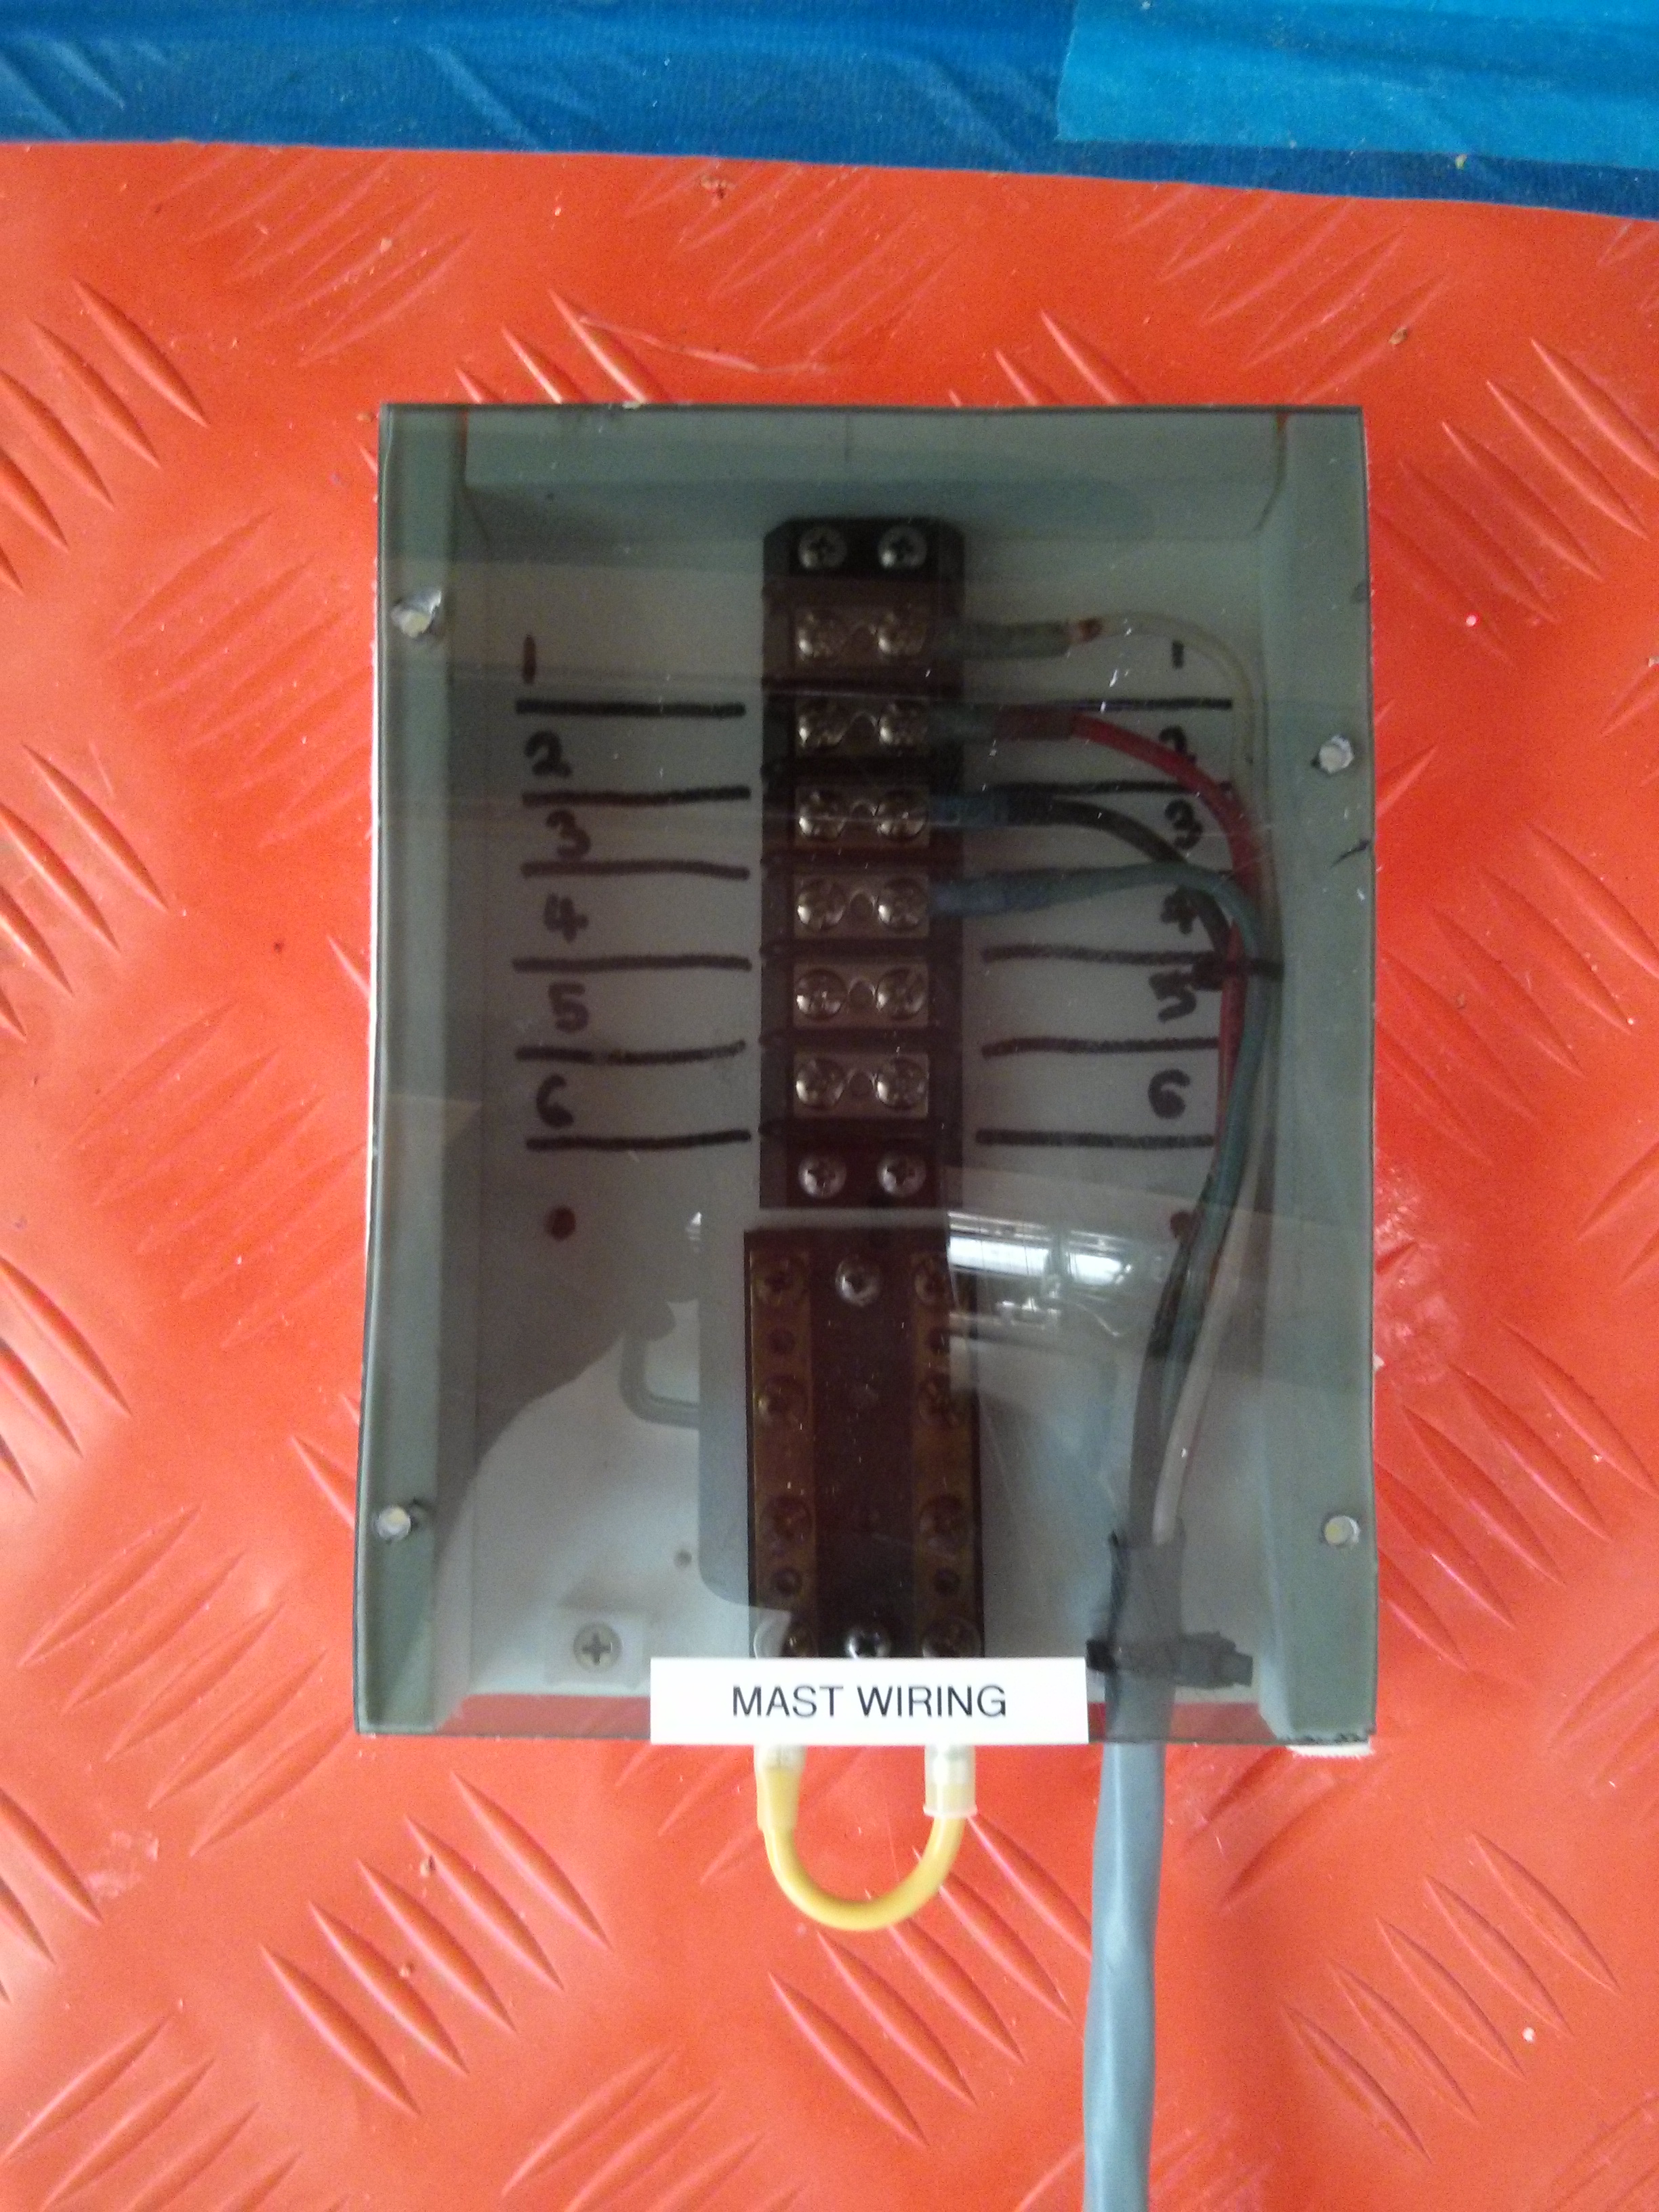 Mast wiring panel to be installed under head counter